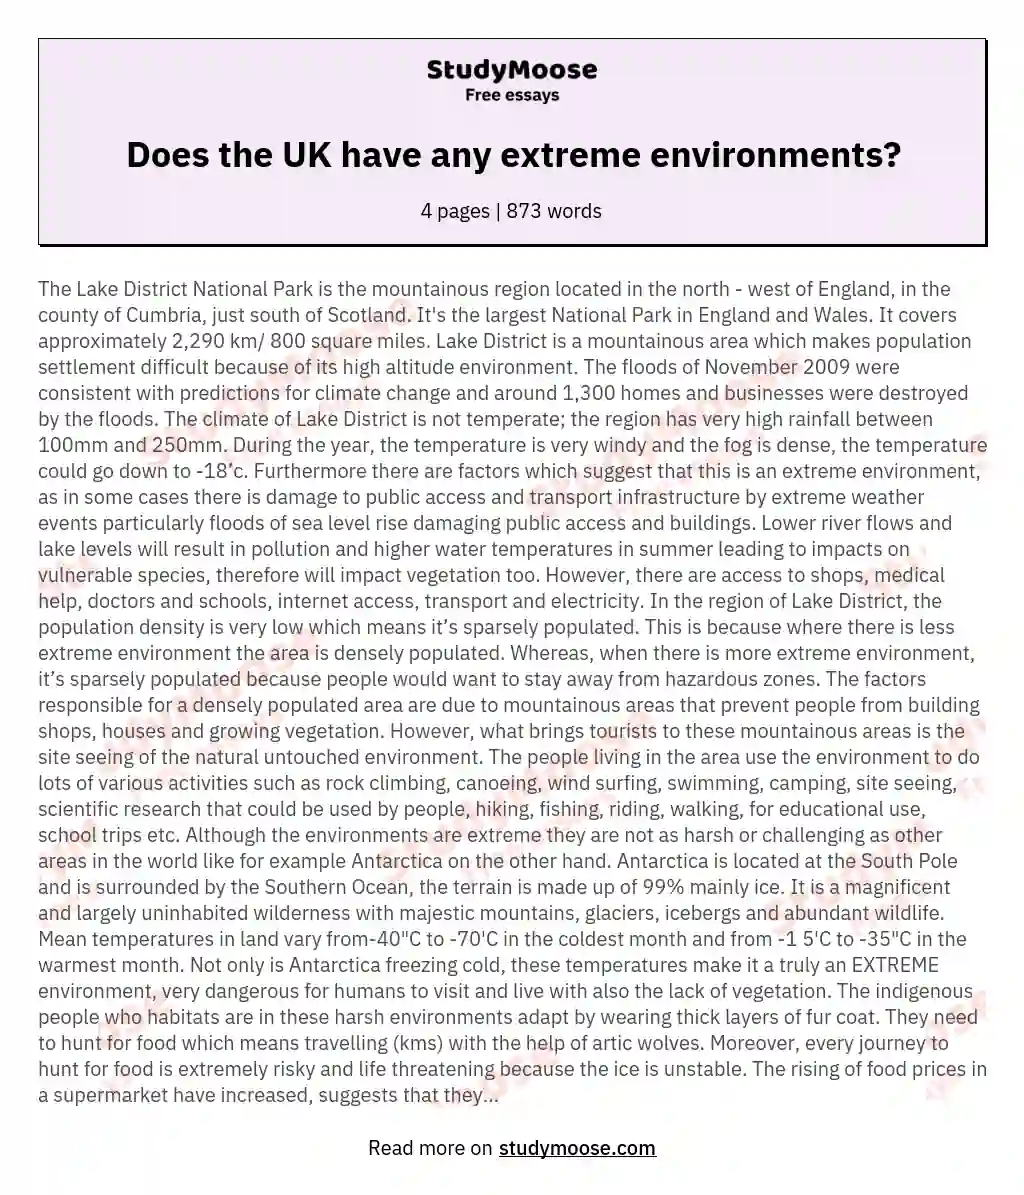 Does the UK have any extreme environments?